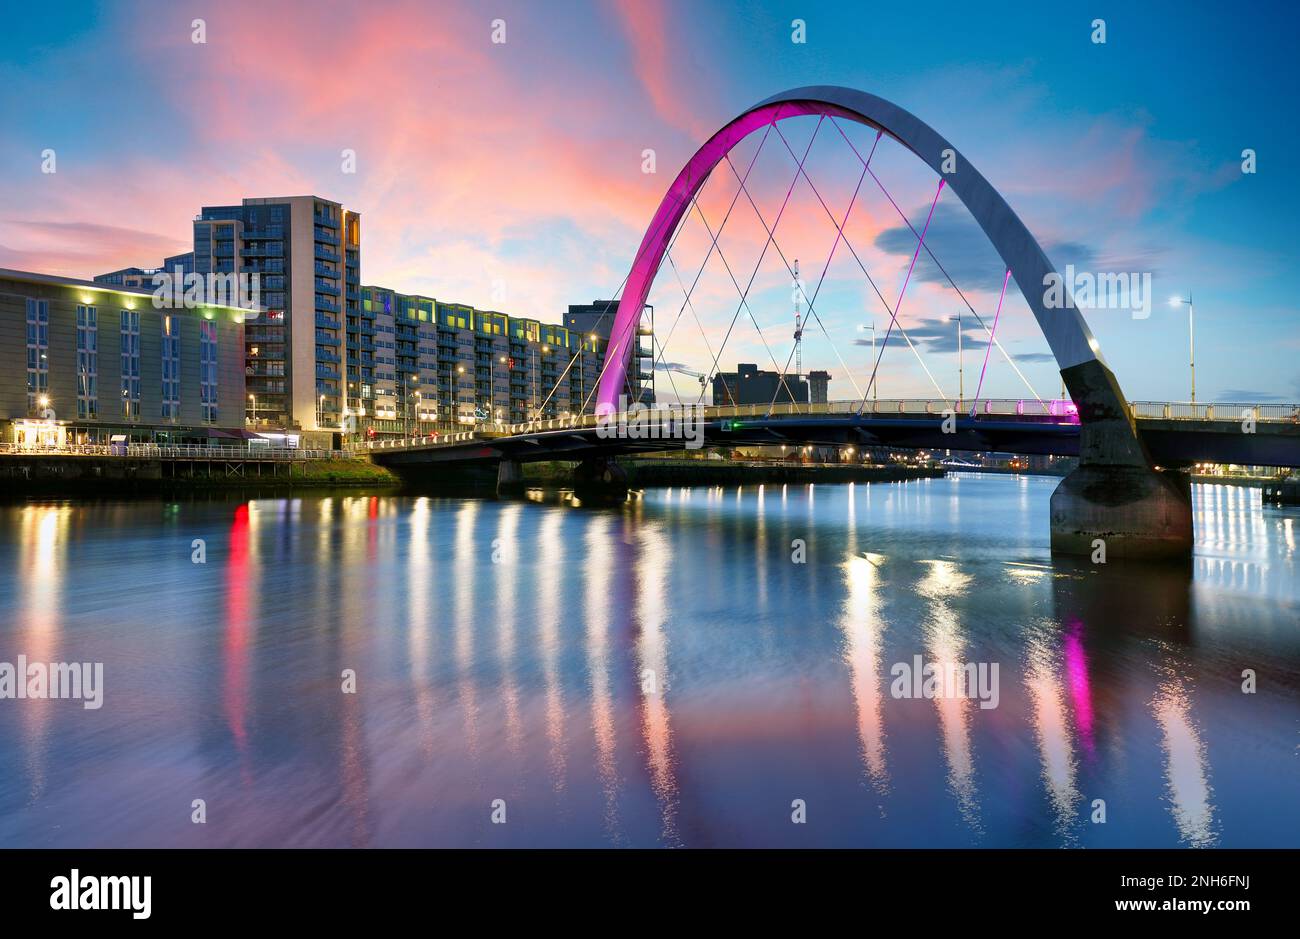 Beautiful Sunset Clyde Arc Bridge across river in Glasgow, Scotland, UK. It is nice weather with reflection on water, blue sky, lights from buildings Stock Photo